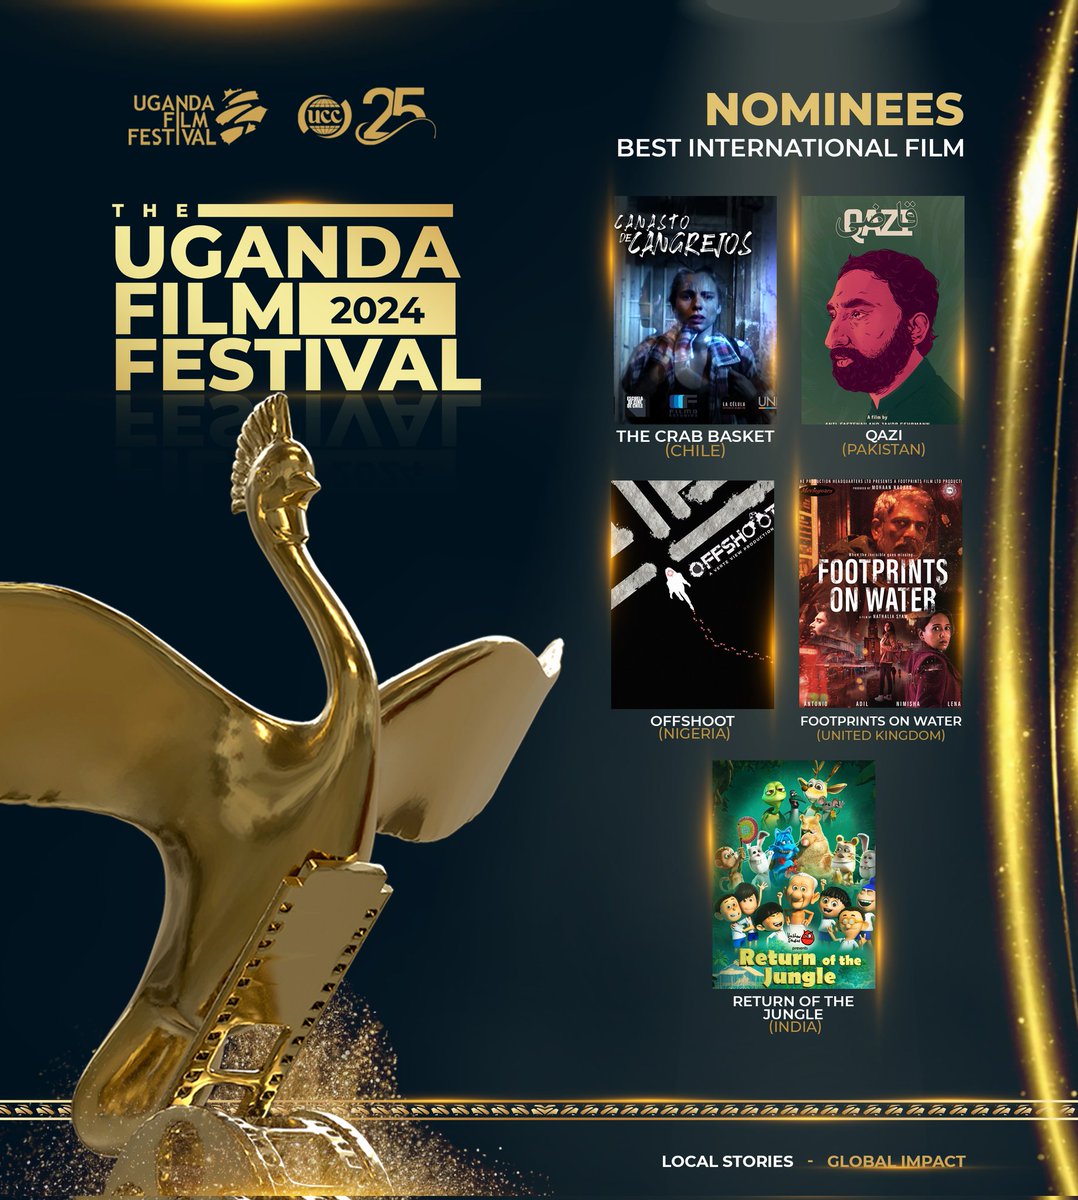 Here is the nomination list for the best International Film nominees in #UFF2024 1. The Crab Basket -Chile 2. Footprints On Water- United Kingdom 3. OFFSHOOT - Nigeria 4. Qazi -Pakistan 5. Return of the Jungle -India Cc: @UCC_Official | @UgandaFilm #LocalStoriesGlobalimpact